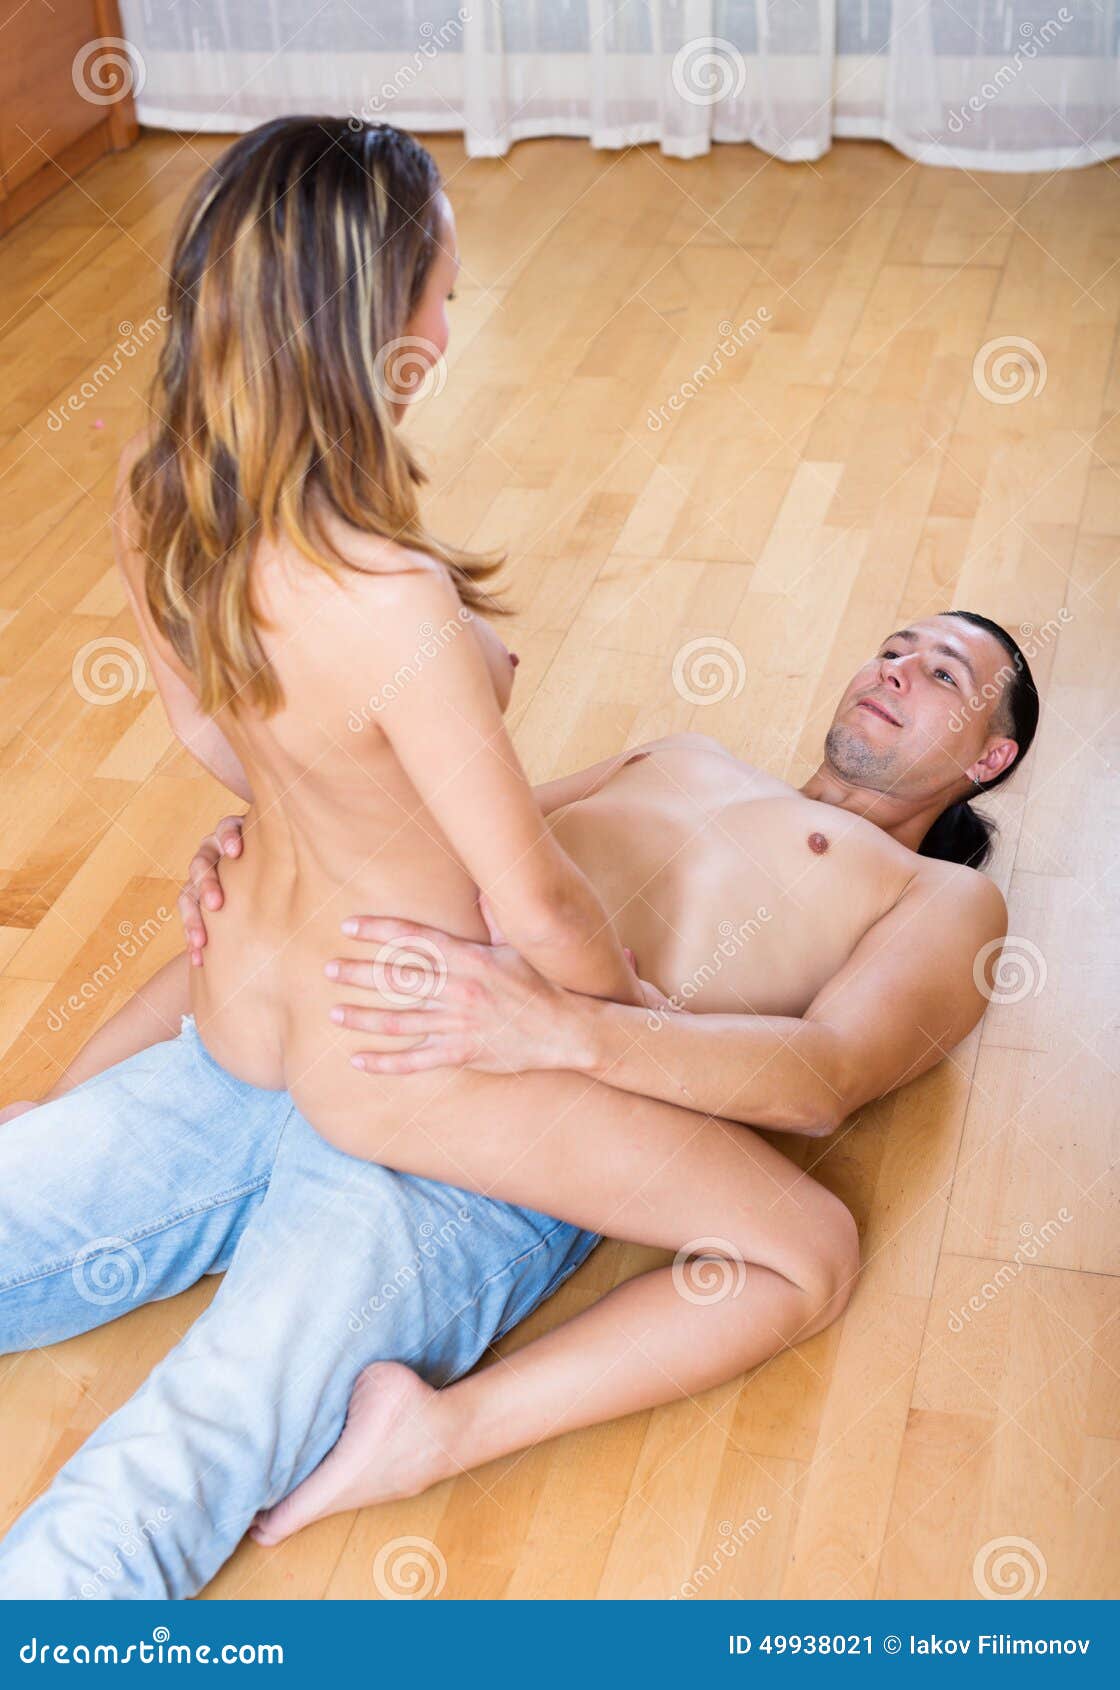 girl with man sex only photo hot photo